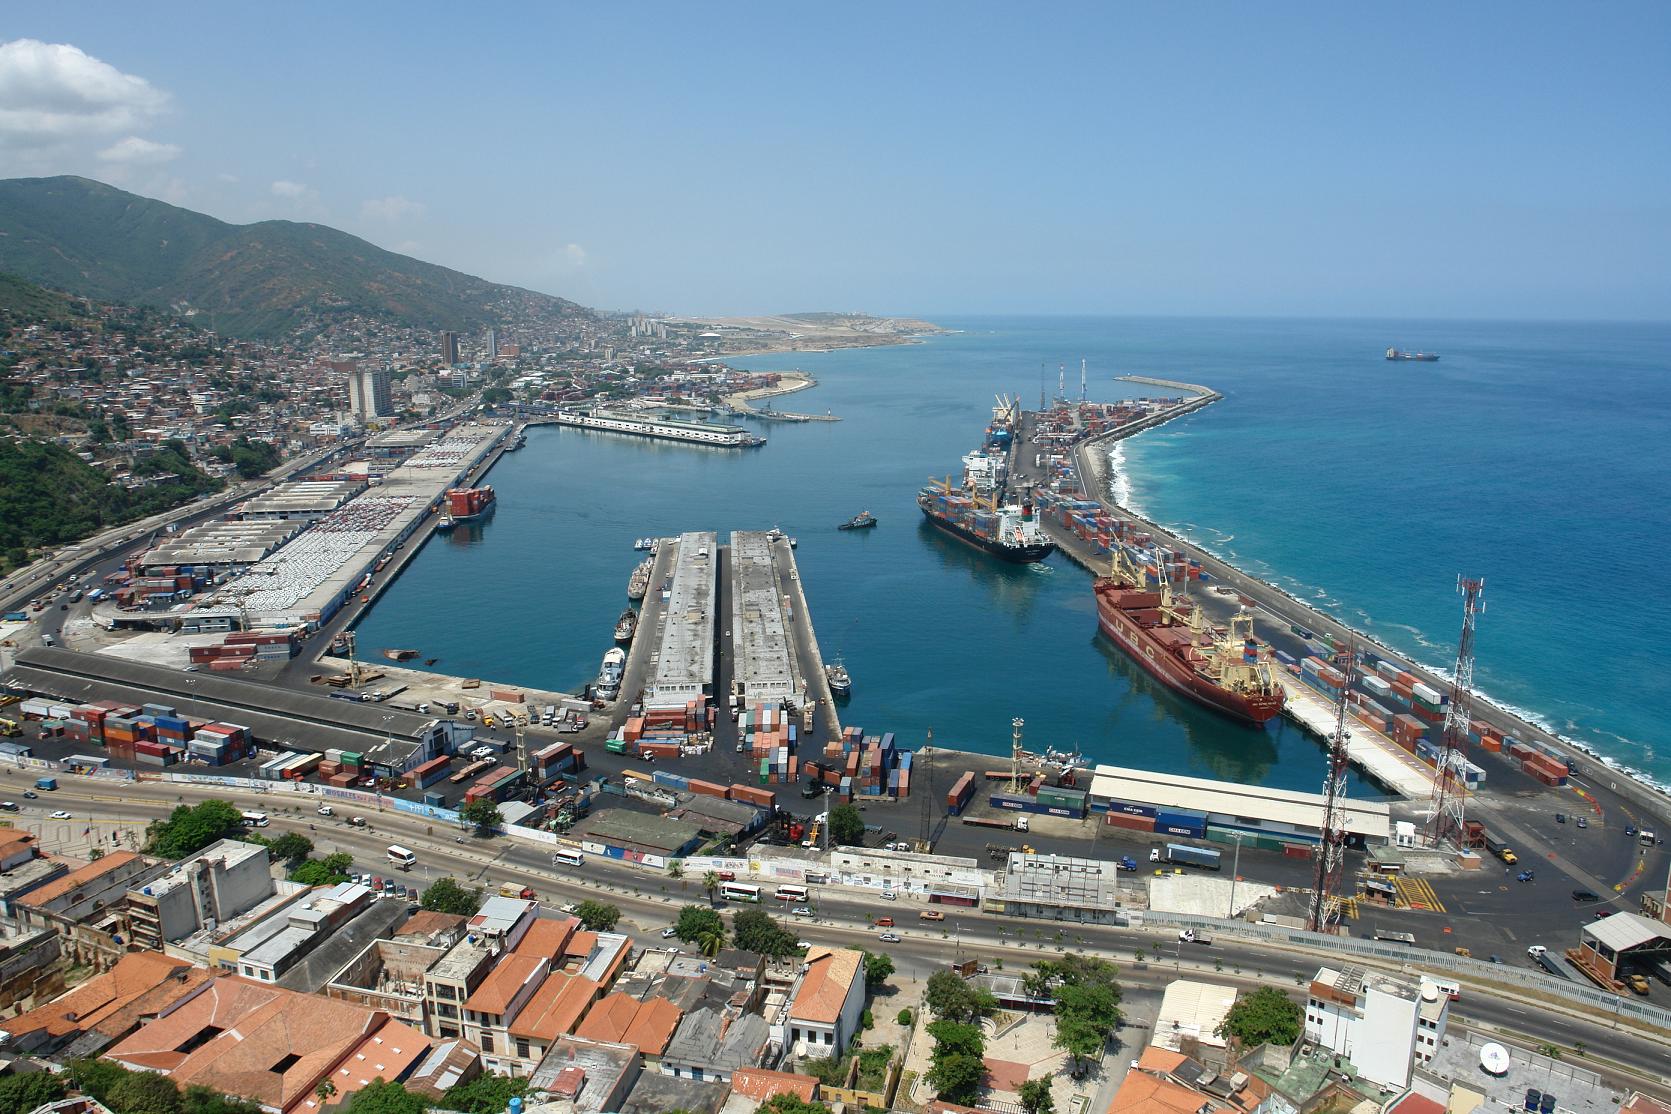 La Guaira Port, one of the most important points of Venezuela's international trade. File photo.